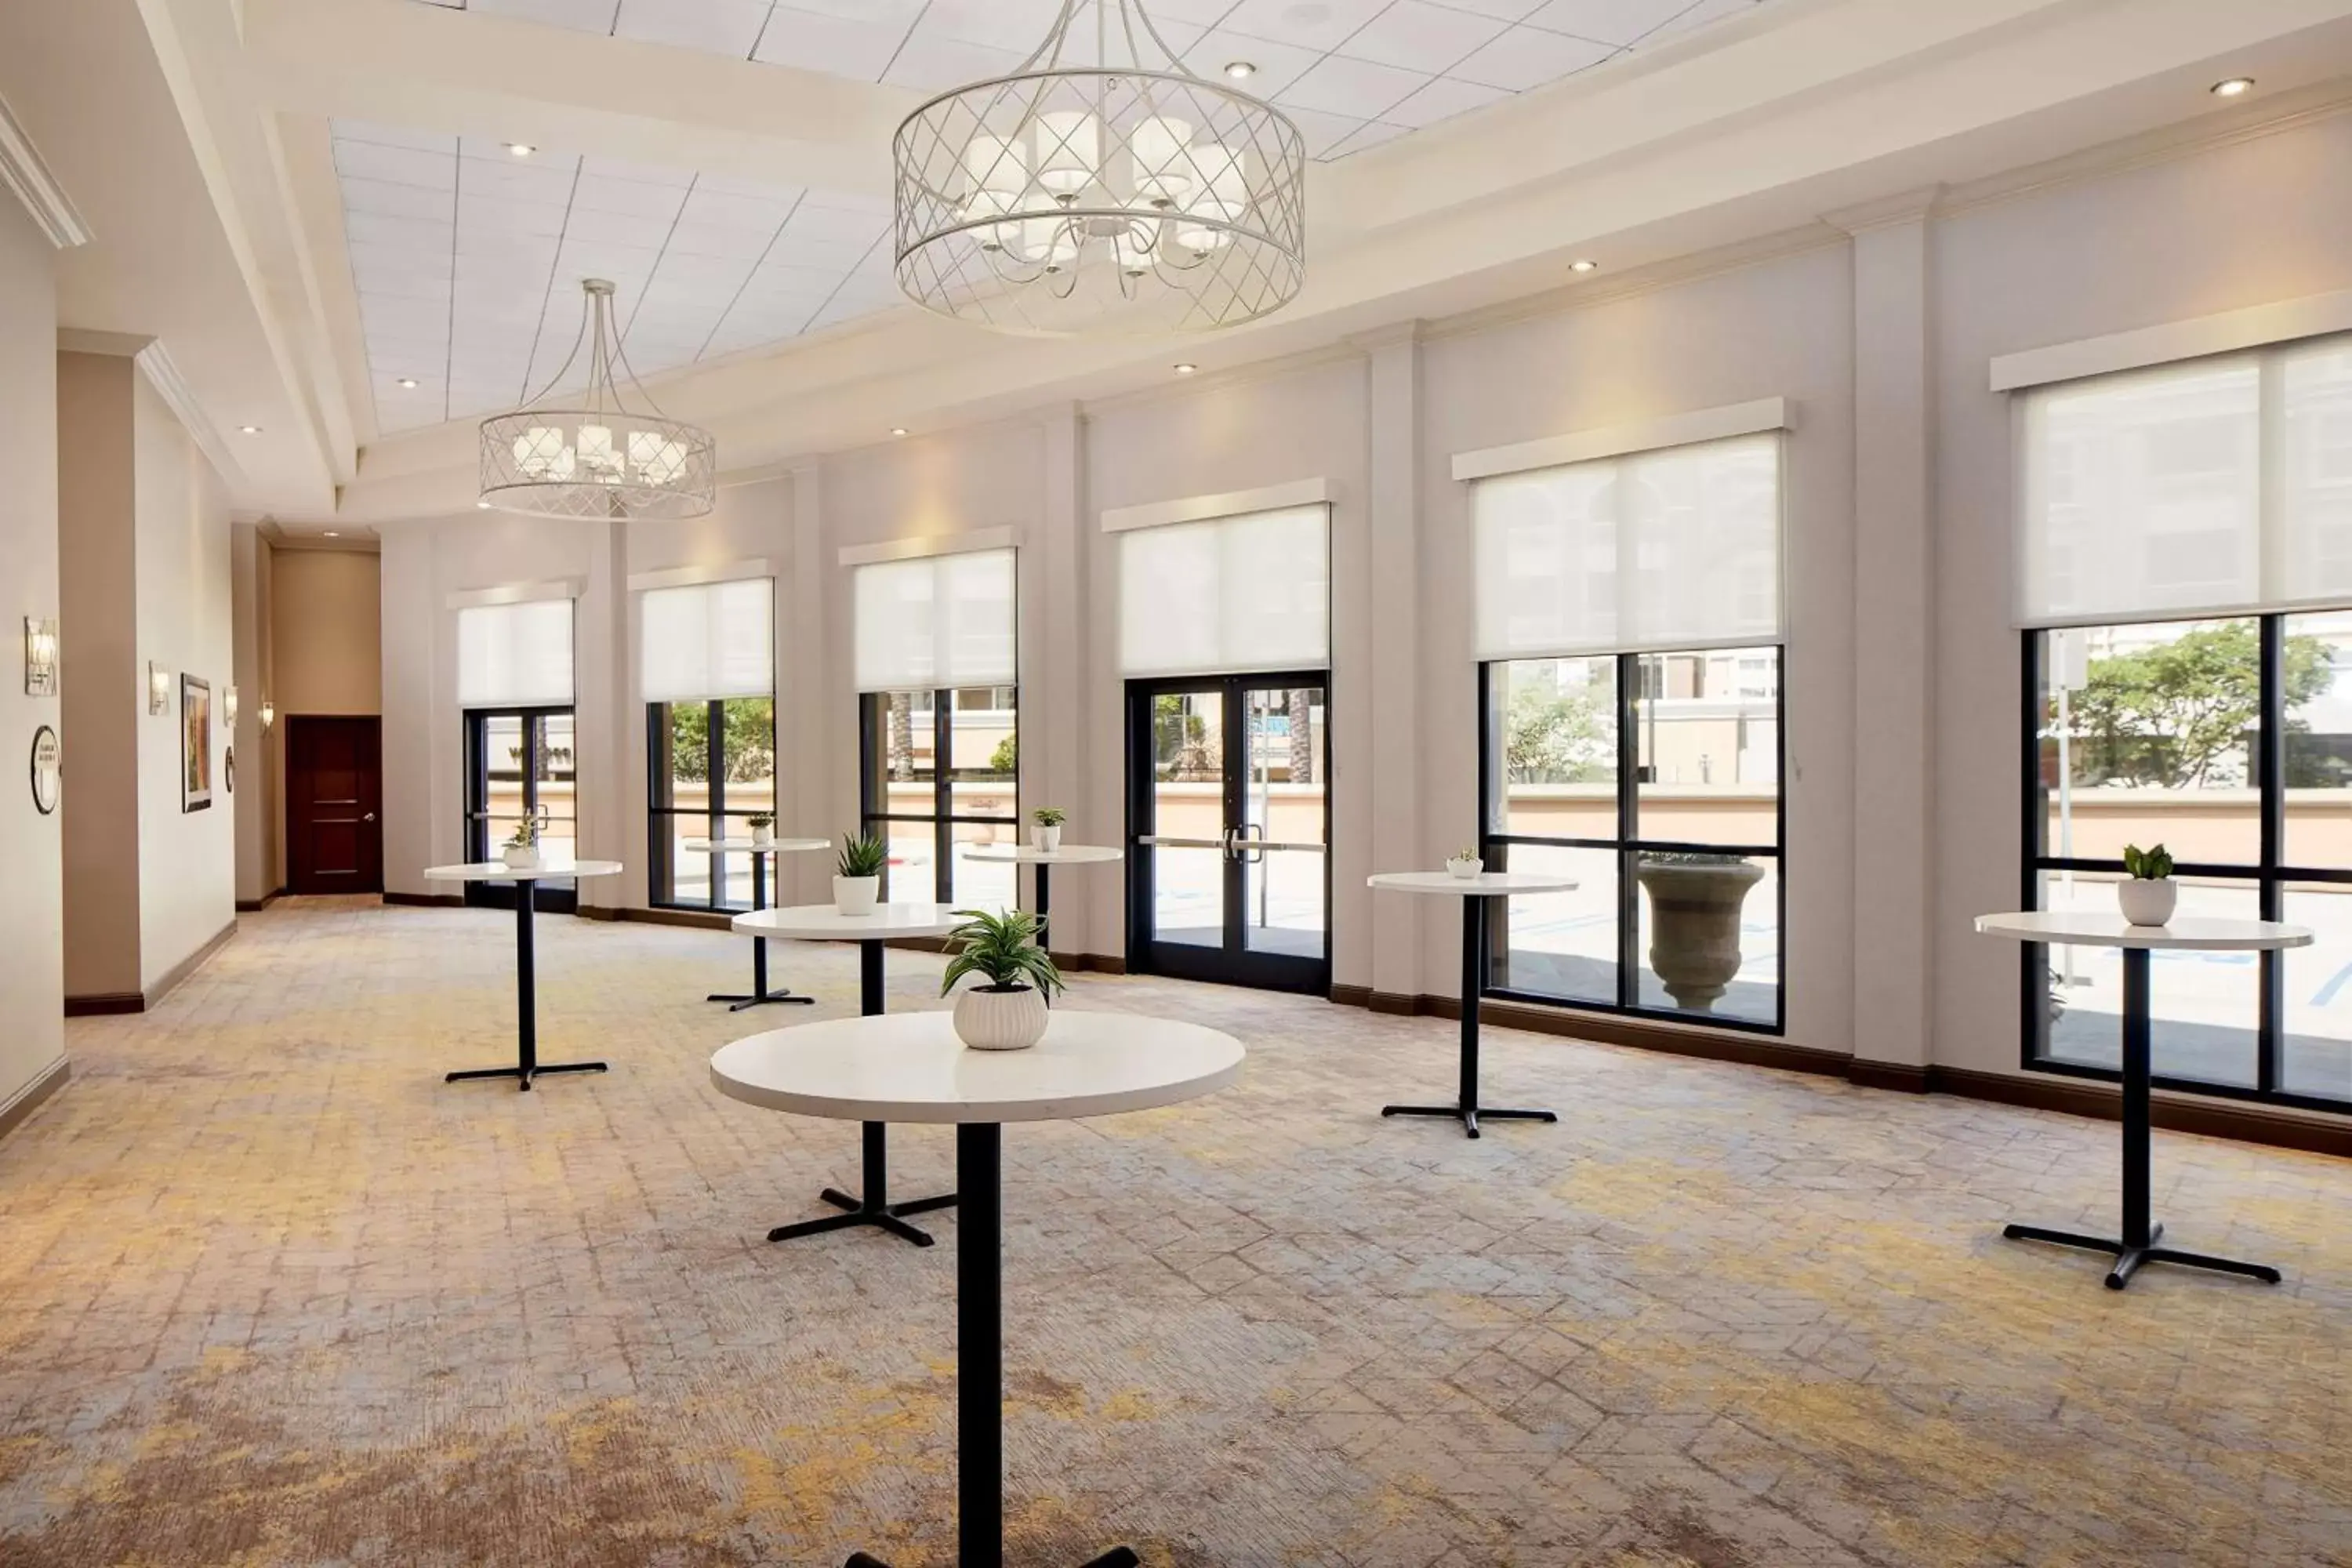 Meeting/conference room in DoubleTree by Hilton Santa Ana - Orange County Airport